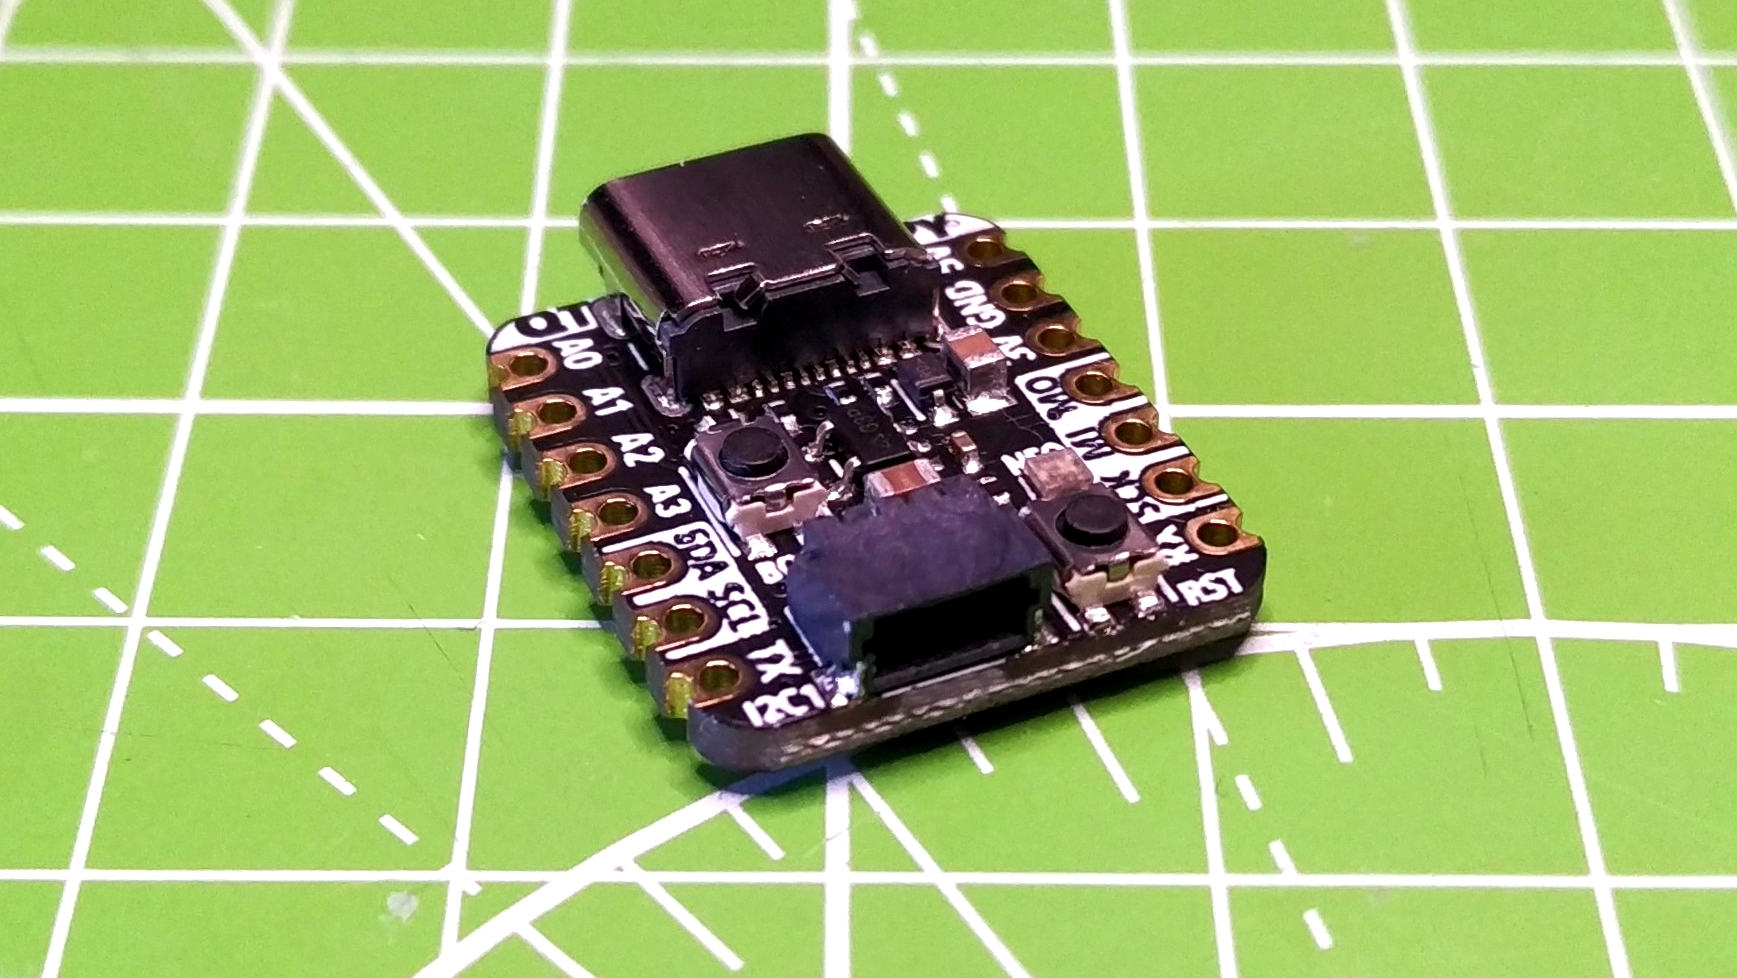 adafruit-qt-py-rp2040-review:-a-tiny-board-for-great-projects